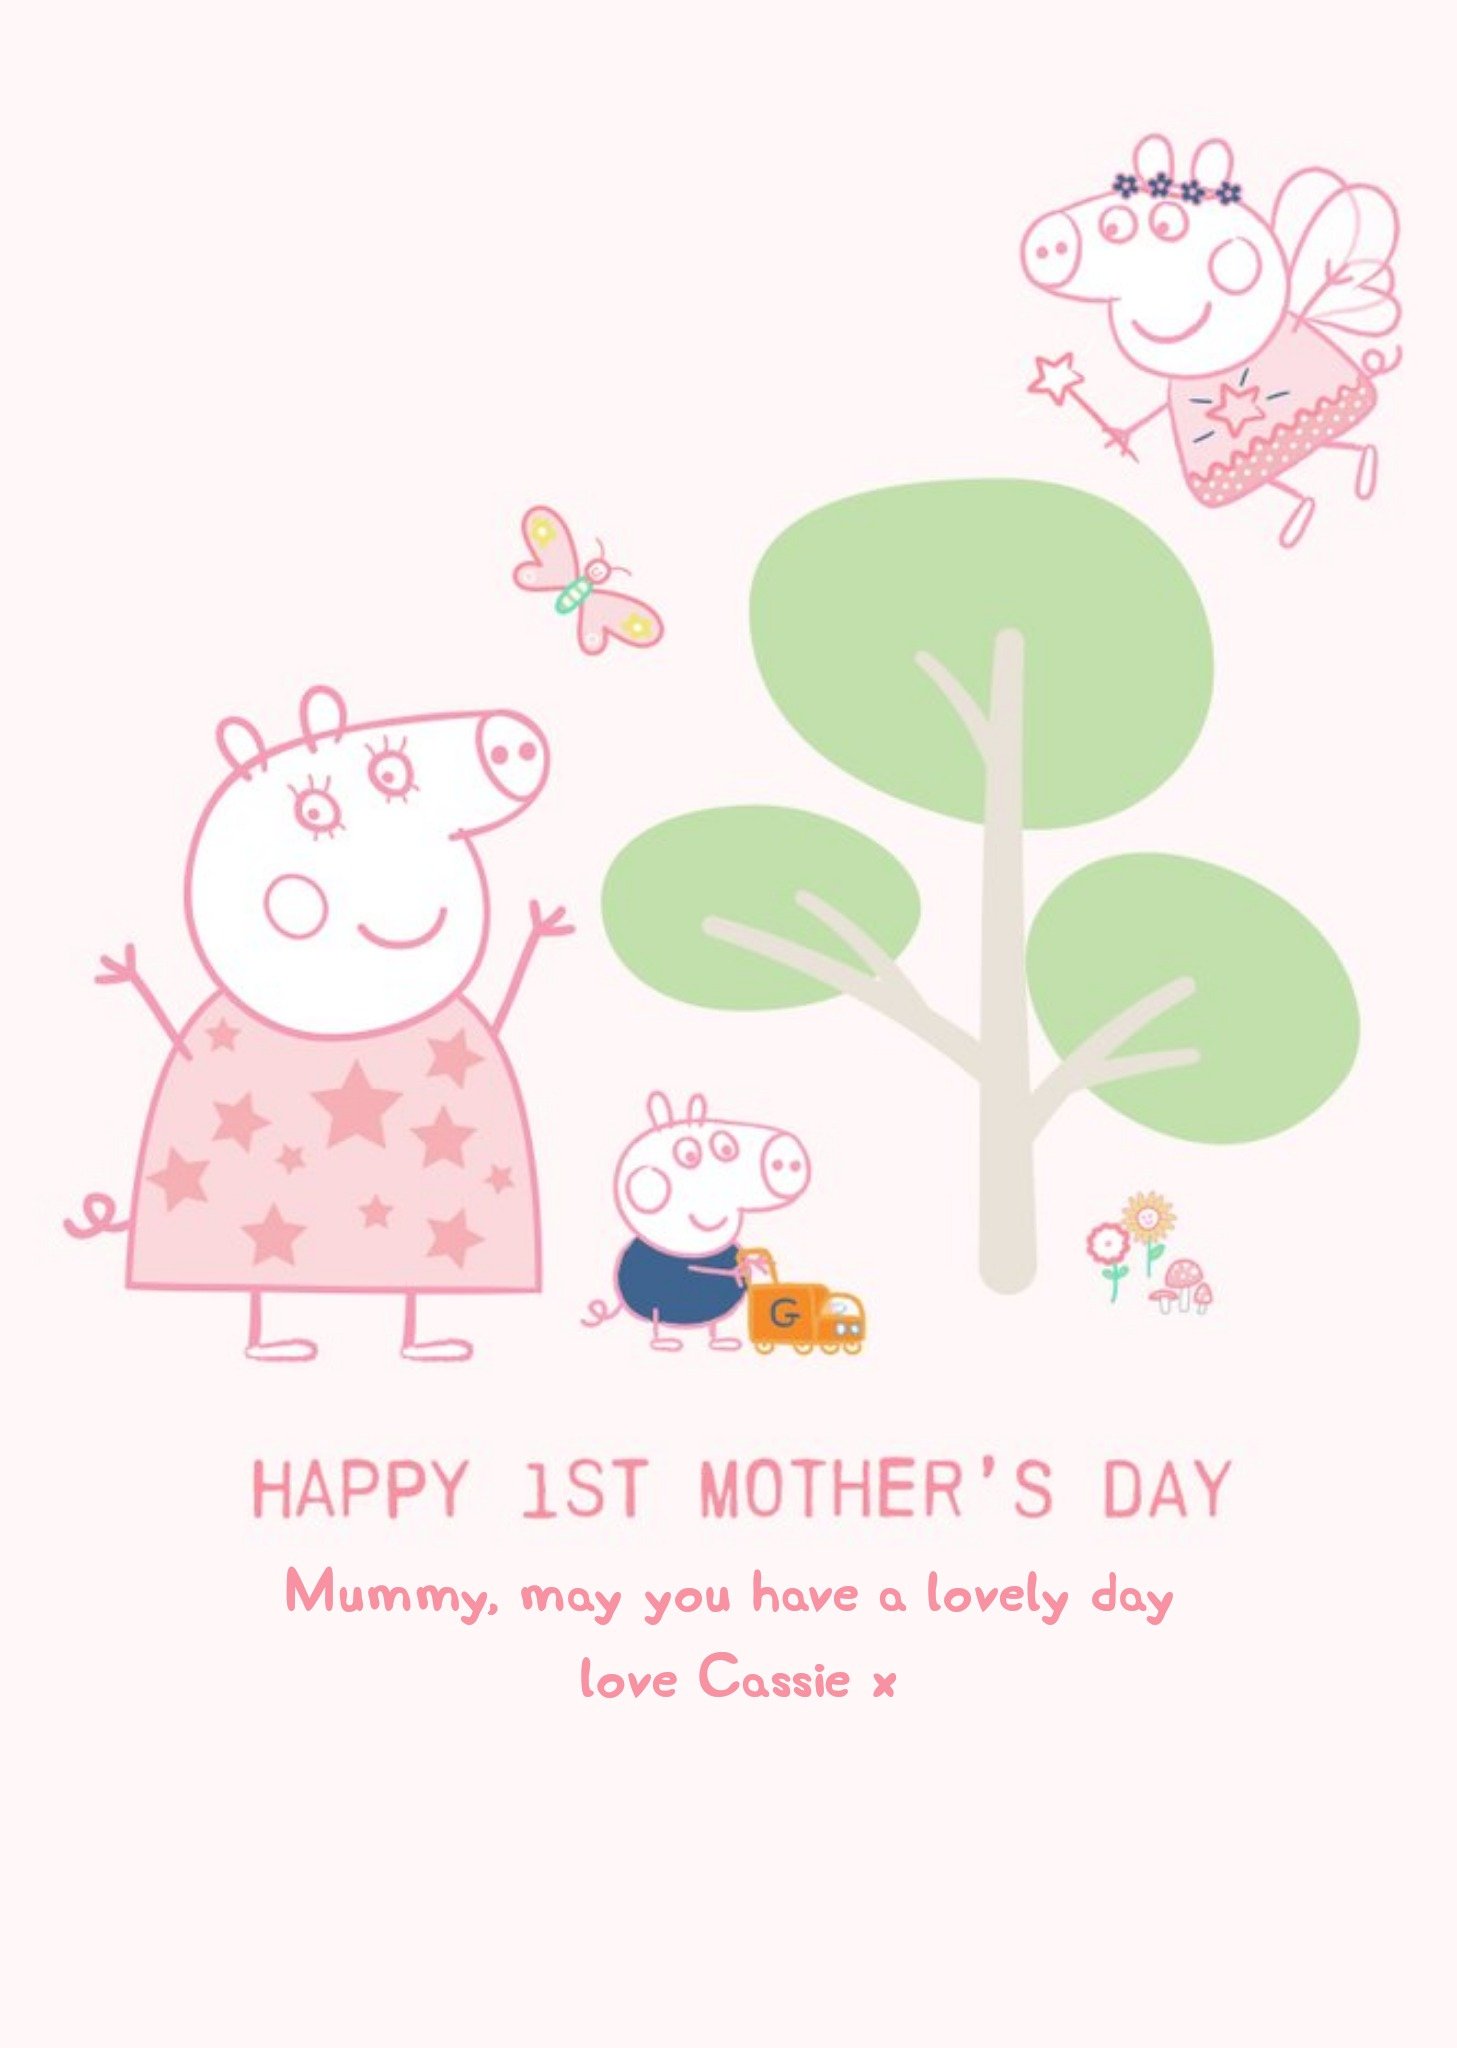 Cute Peppa Pig And George Happy First Mother's Day Card For Mummy, Large